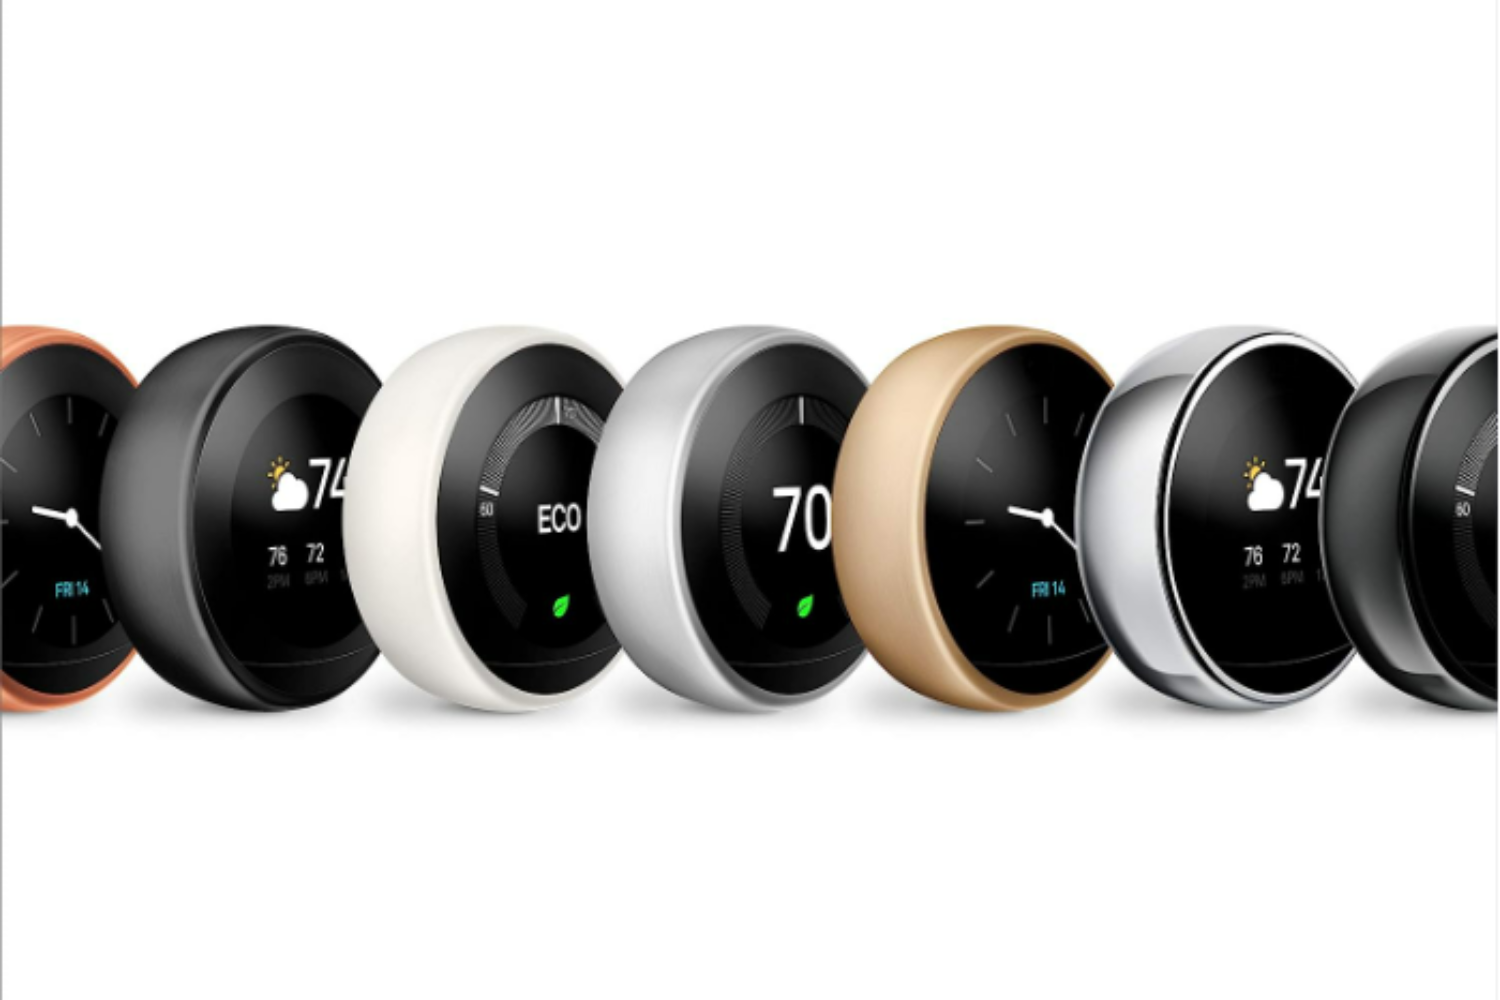 Nest Learning Thermostat home office automation system